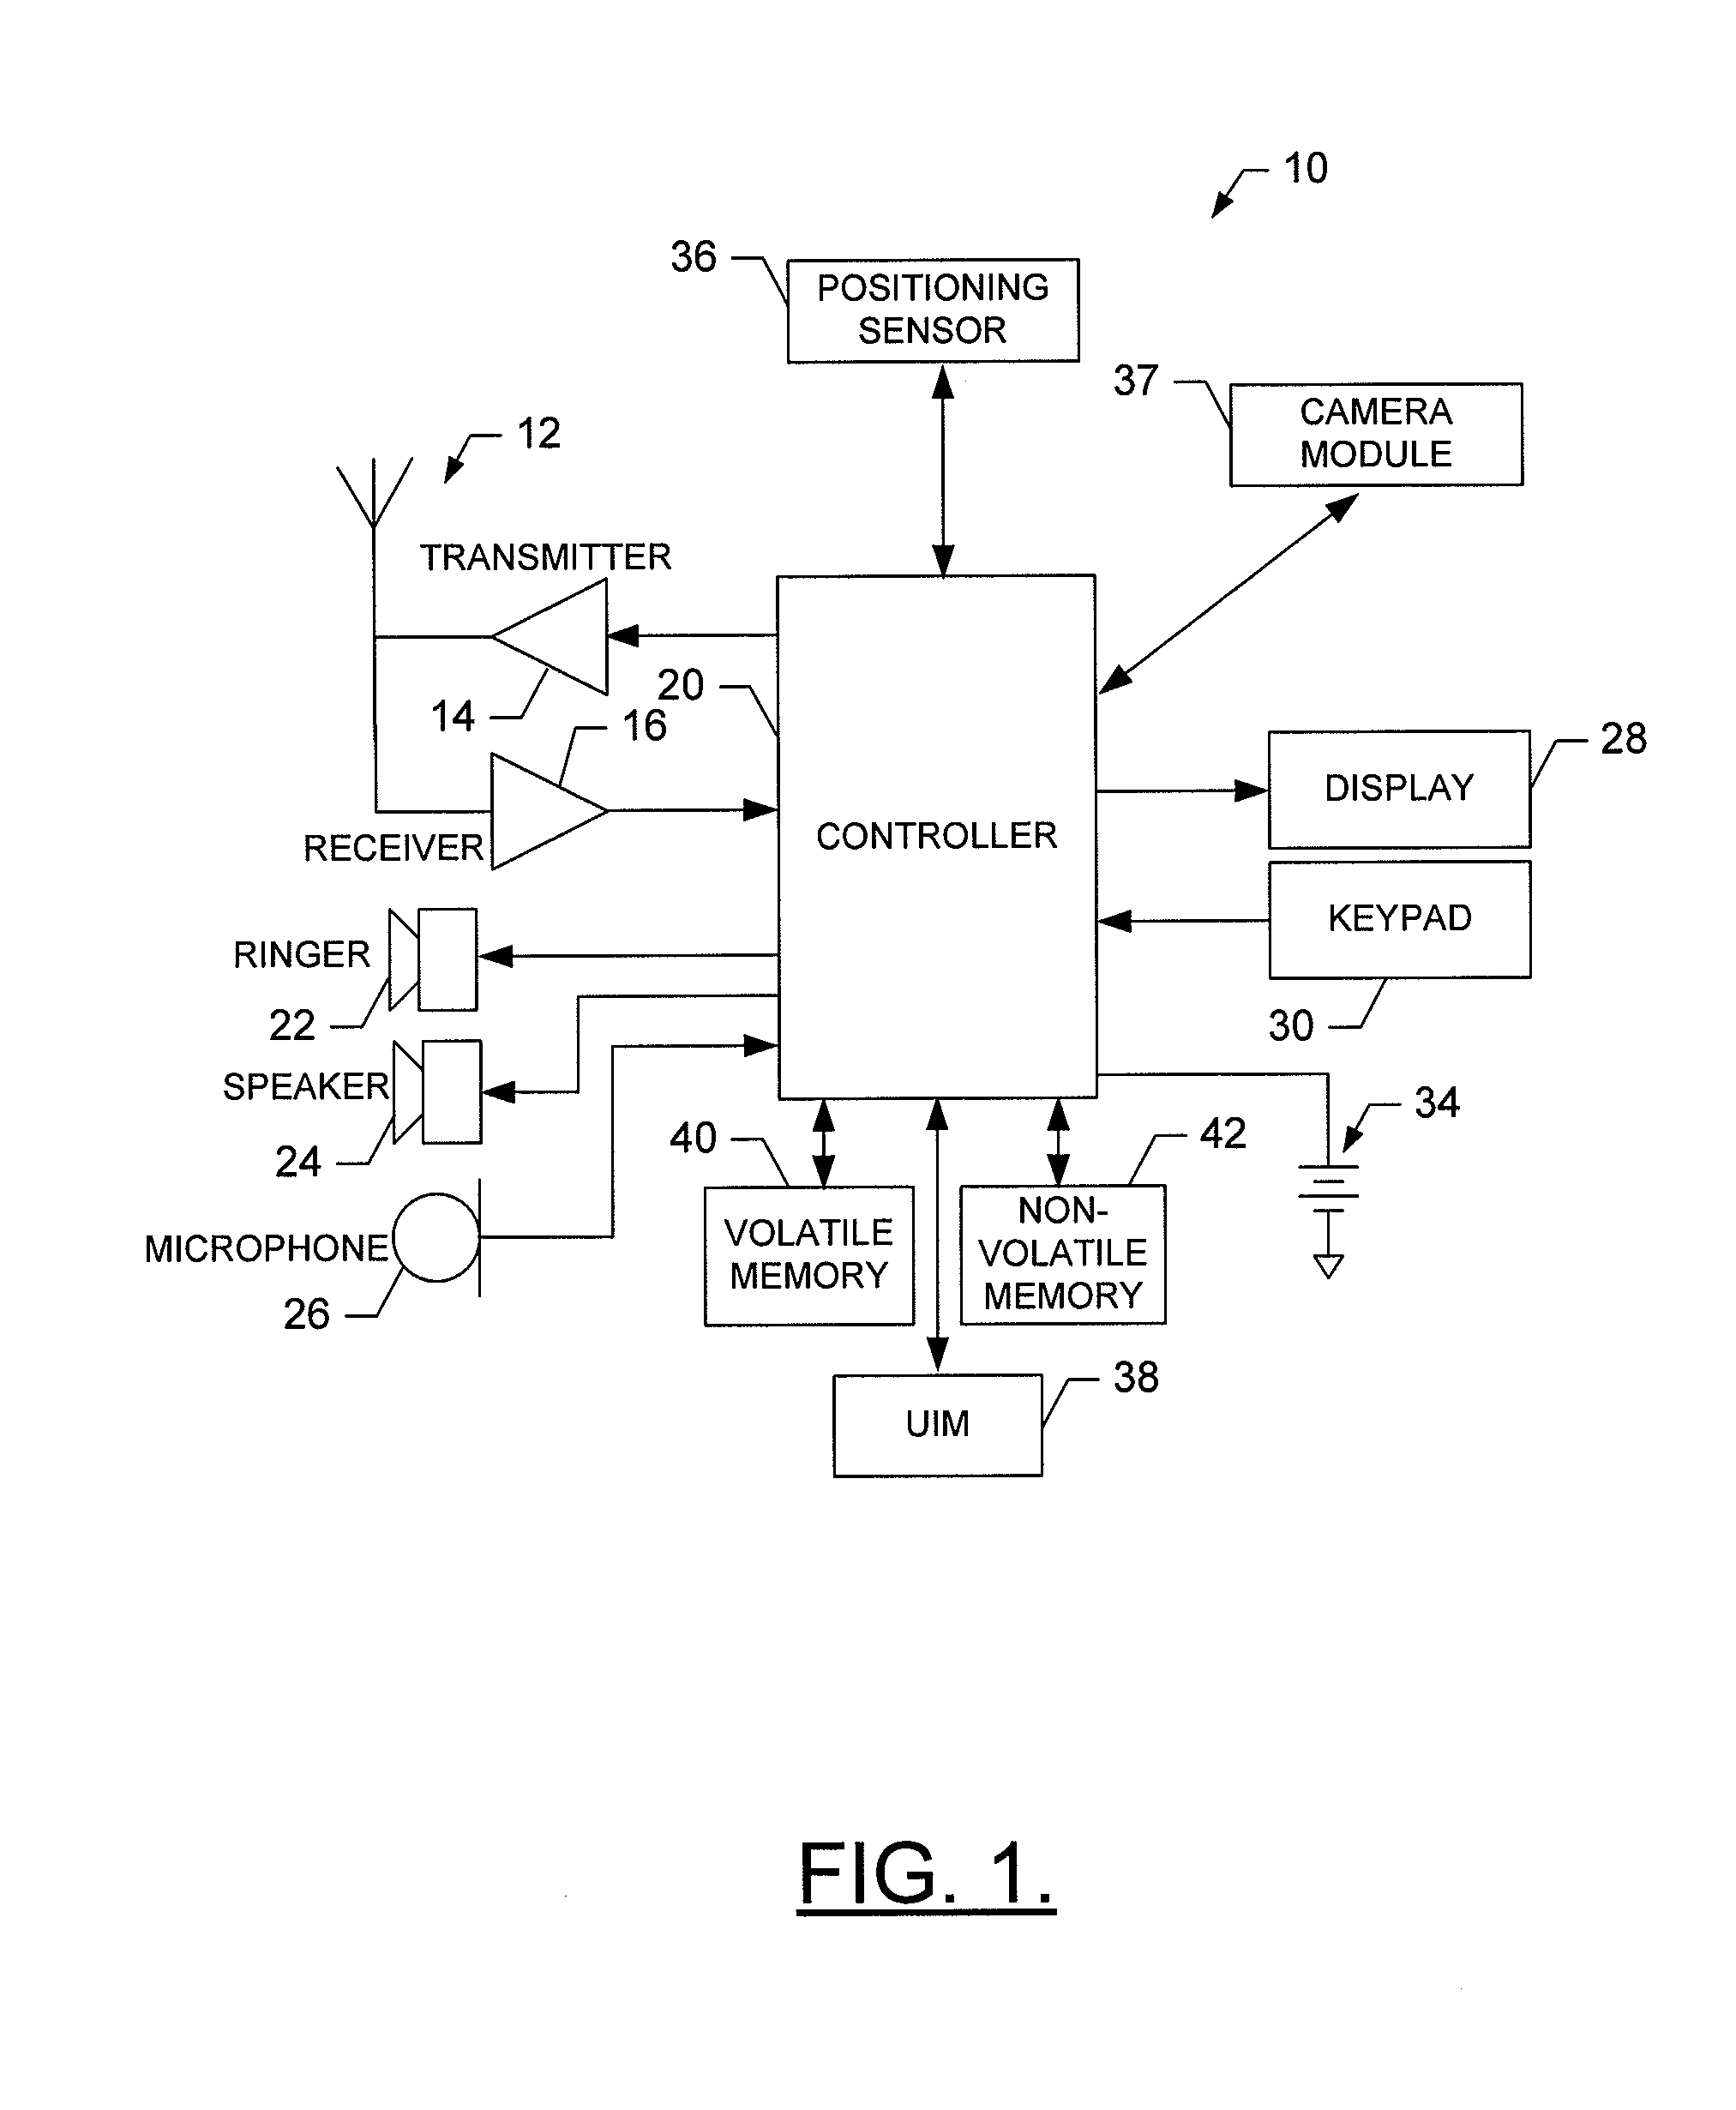 Method, apparatus and computer program product for providing an information model-based user interface